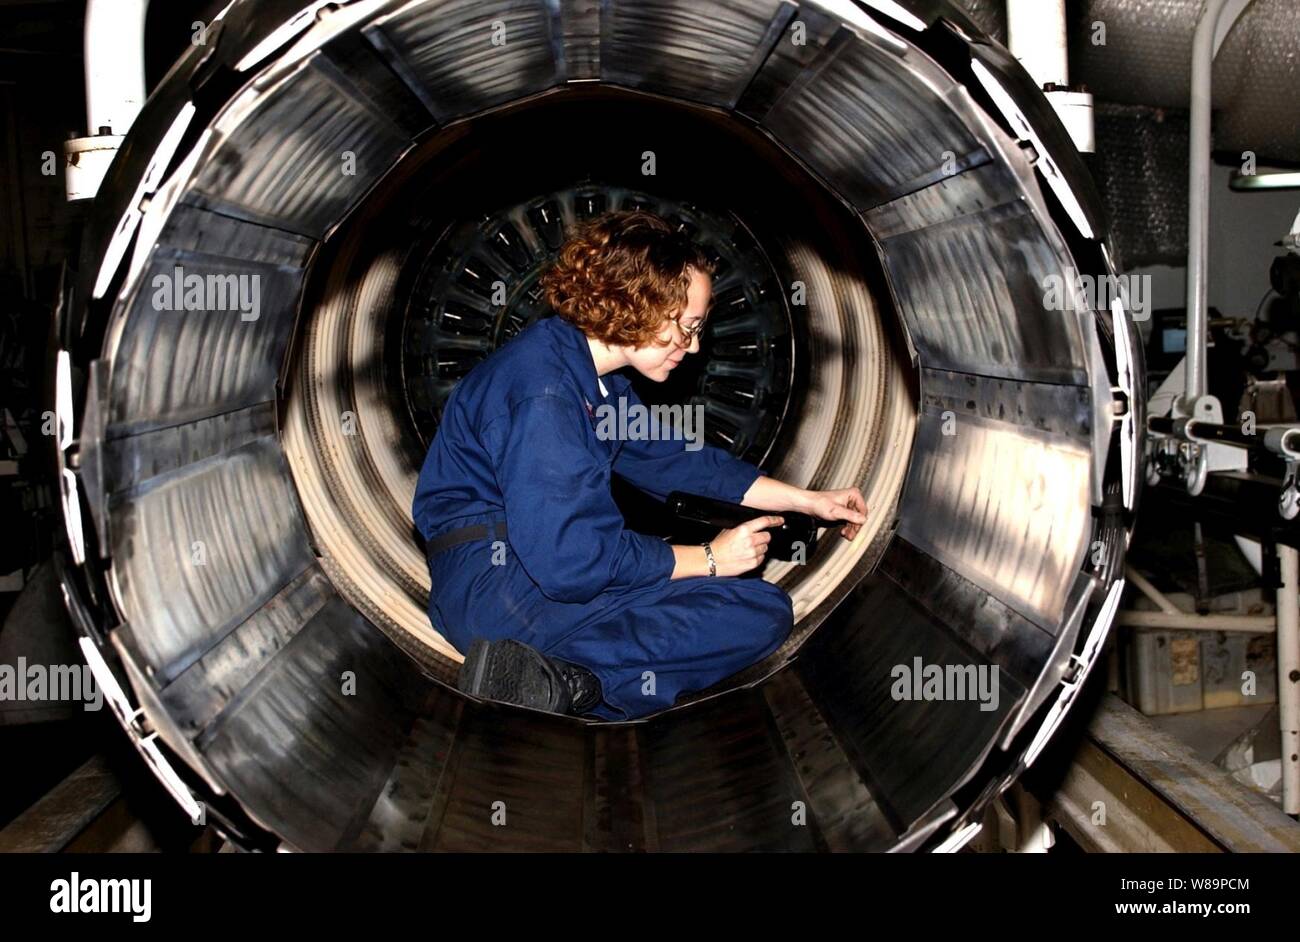 Petty Officer 2nd class Dawn Leclair performs maintenance on a General Electric F110-GE-400 jet engine in the Jet Shop aboard the aircraft carrier USS Harry S. Truman (CVN 75) underway in the Persian Gulf on Nov. 29, 2004.  The F110-GE-400 engine is used by the F-14B Tomcats assigned to Fighter Squadron 32.  Truman's Carrier Strike Group Ten 10 and embarked Carrier Air Wing 3 are deployed in support of the Global War on Terror.  Leclair is a Navy aviation machinist's mate. Stock Photo